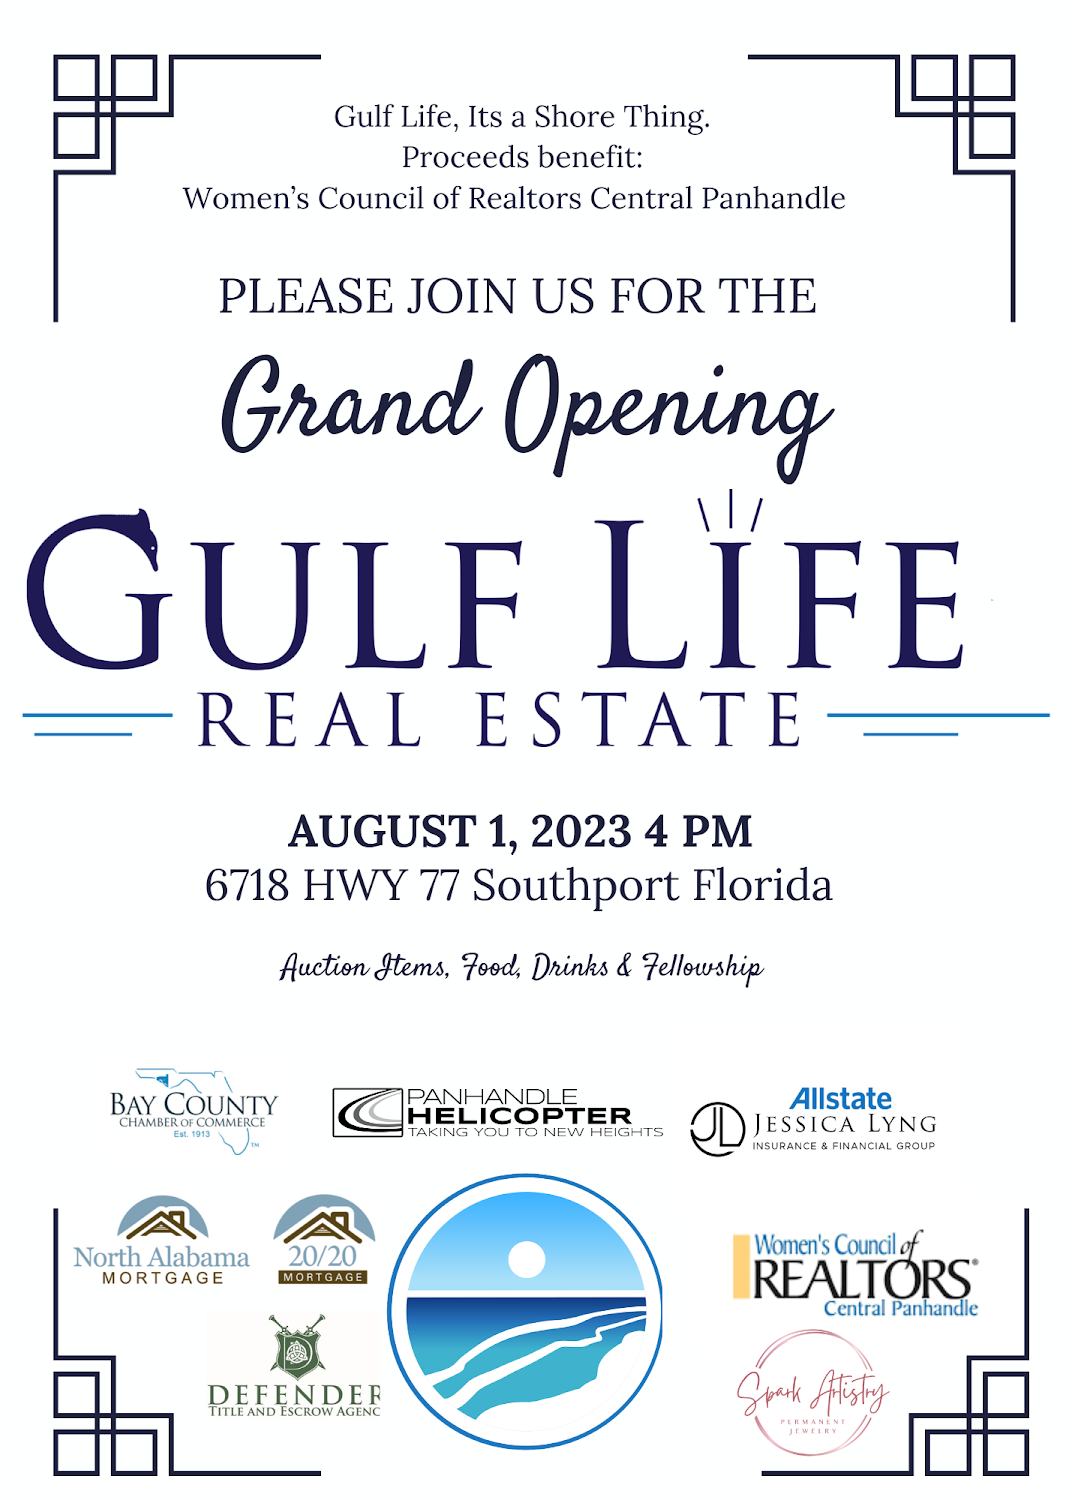 Gulf Life Real Estate Grand Opening in Southport